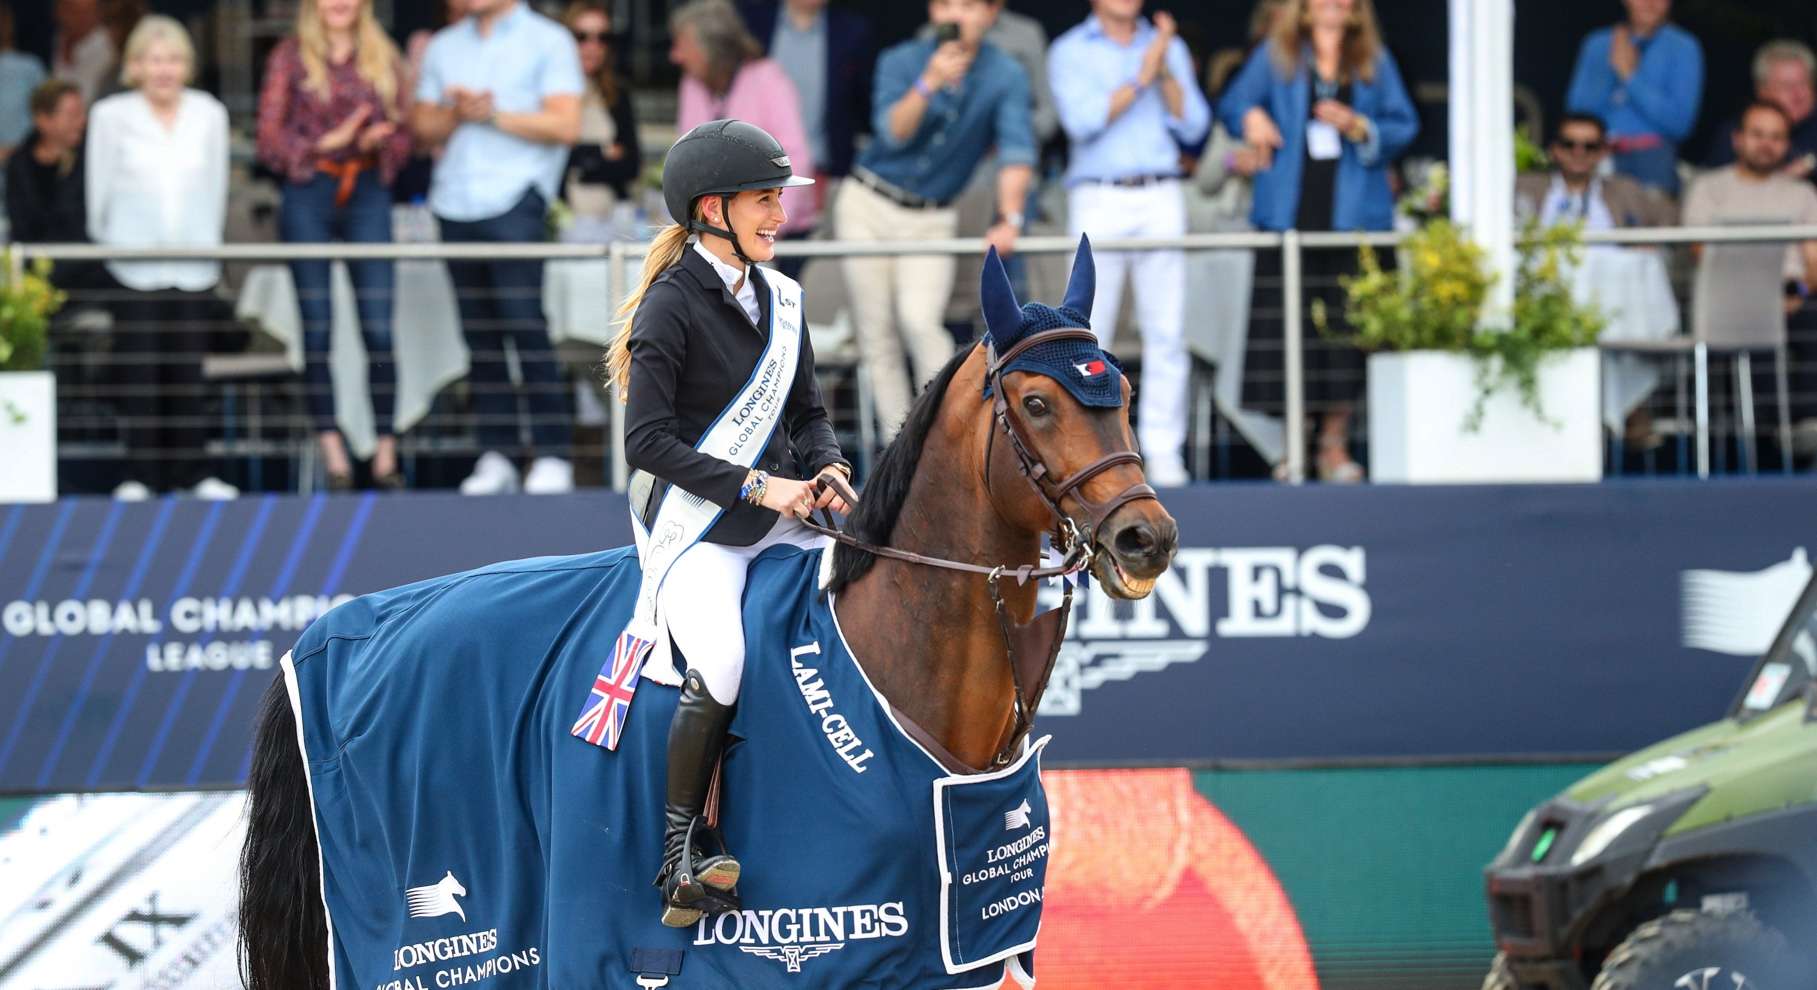 Jessica Springsteen rocketed to victory in the Longines Global Champions Tour Grand Prix of London with Don Juan